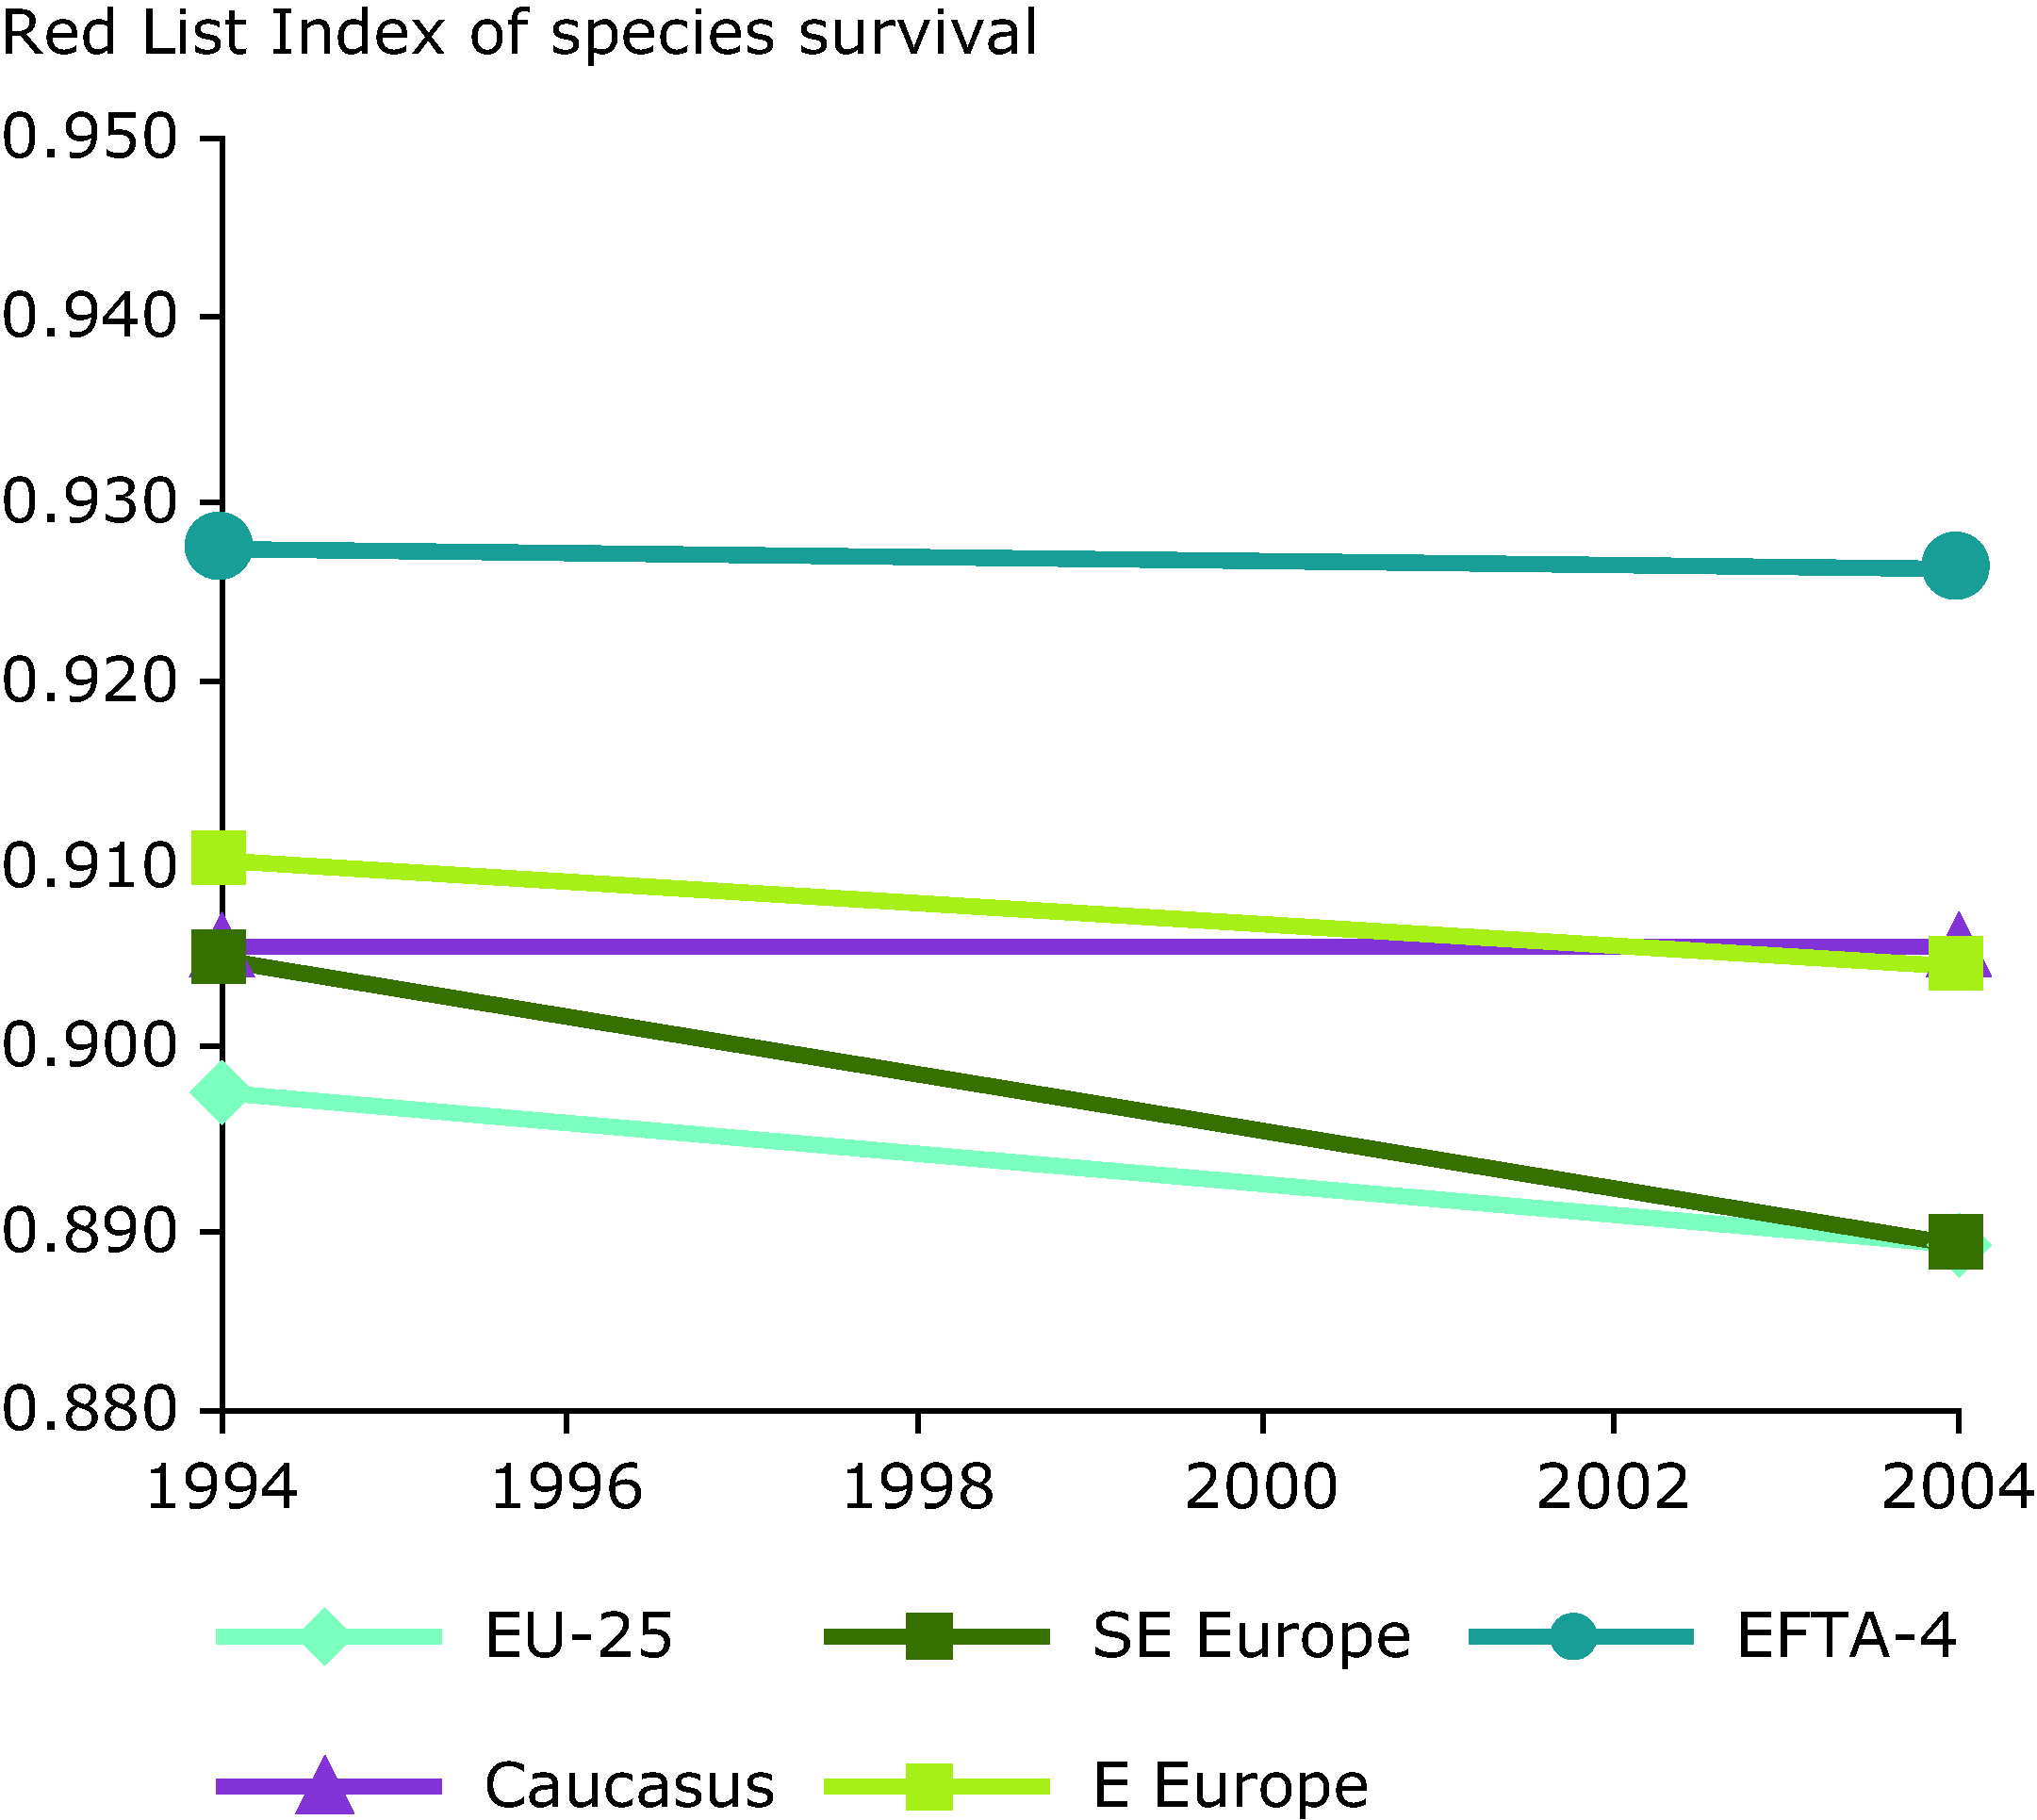 Red List Indices (RLIs) for birds in the EU-25, EFTA-4, Eastern Europe, the Caucasus and South-Eastern Europe during 1994-2004, based on their extinction risk at pan-European level